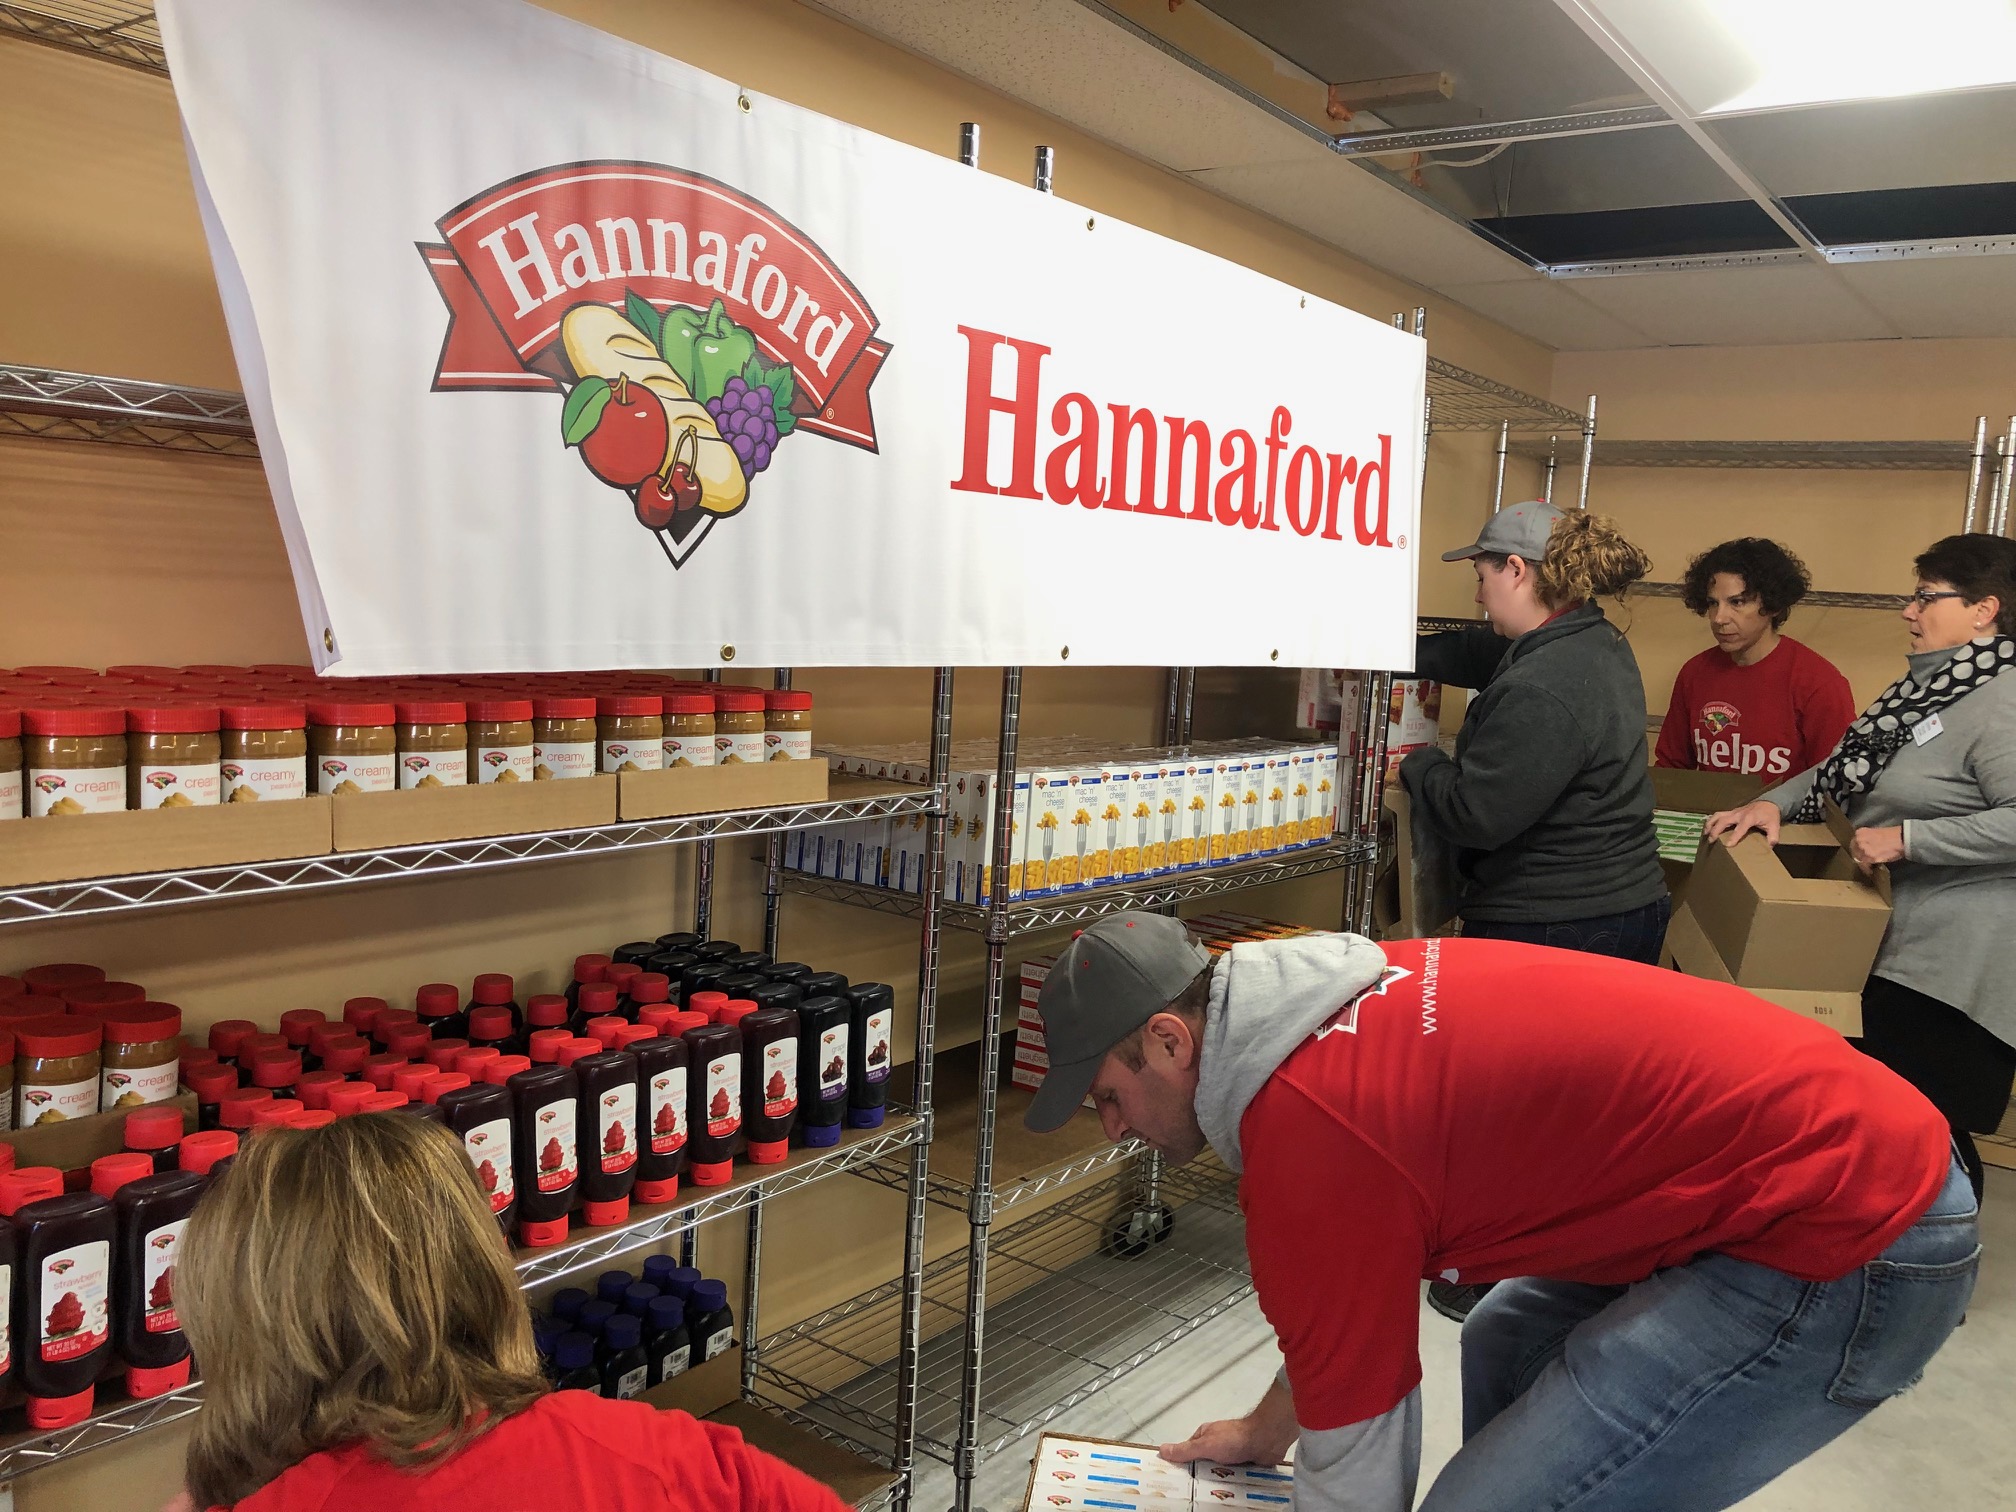 HANNAFORD DONATES 30,000 TO OPEN DOOR MISSION TO EXPAND FOOD PANTRY IN